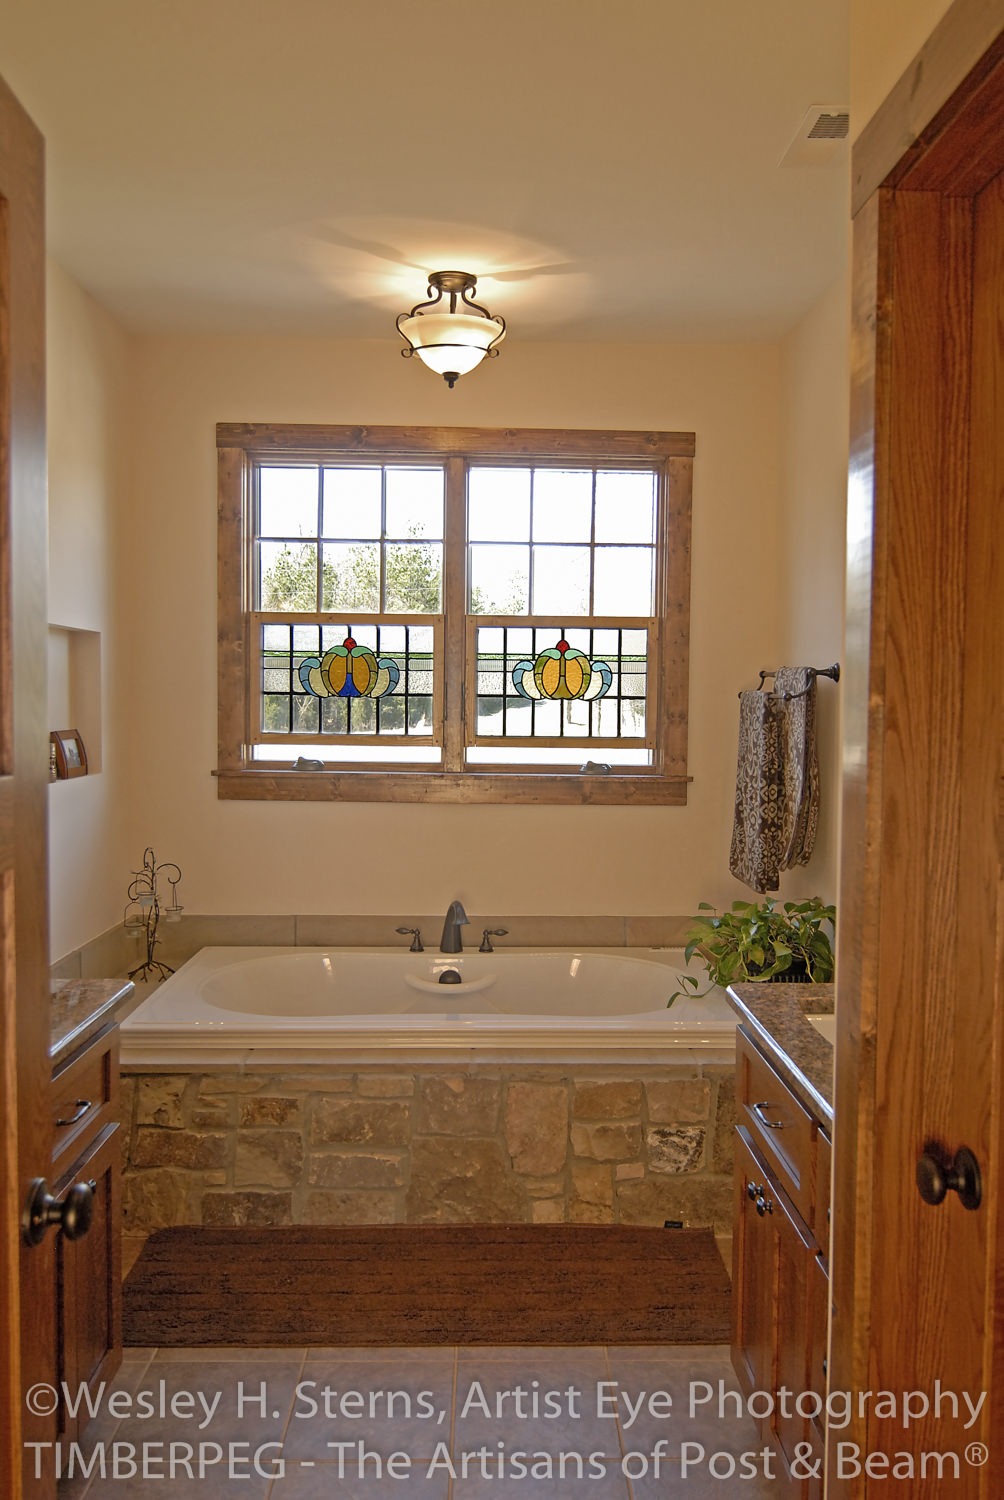 Lake Wylie, SC (T00264) bathroom featuring stained glass on windows